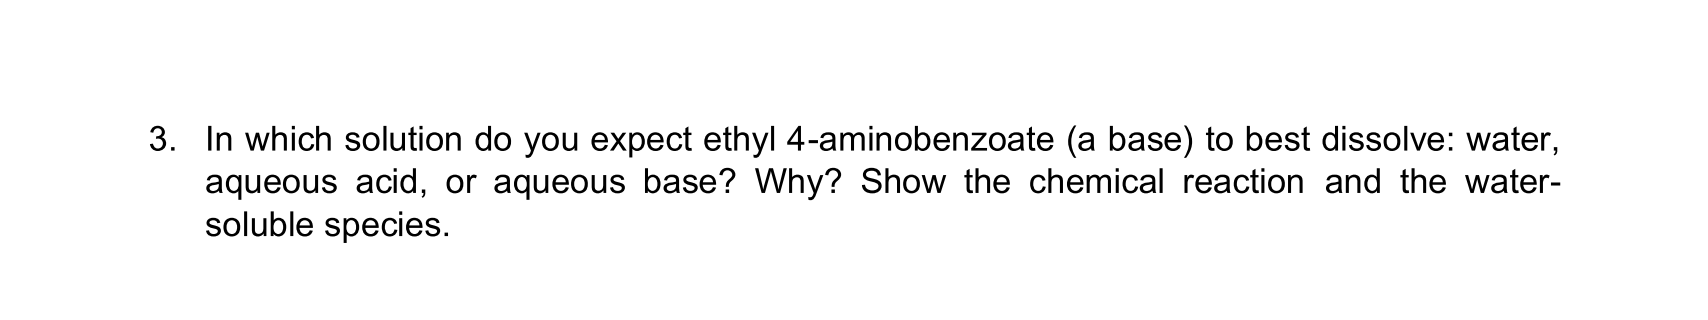 3. In which solution do you expect ethyl 4-aminobenzoate (a base) to best dissolve: water,
aqueous acid, or aqueous base? Why? Show the chemical reaction and the water-
soluble species.
